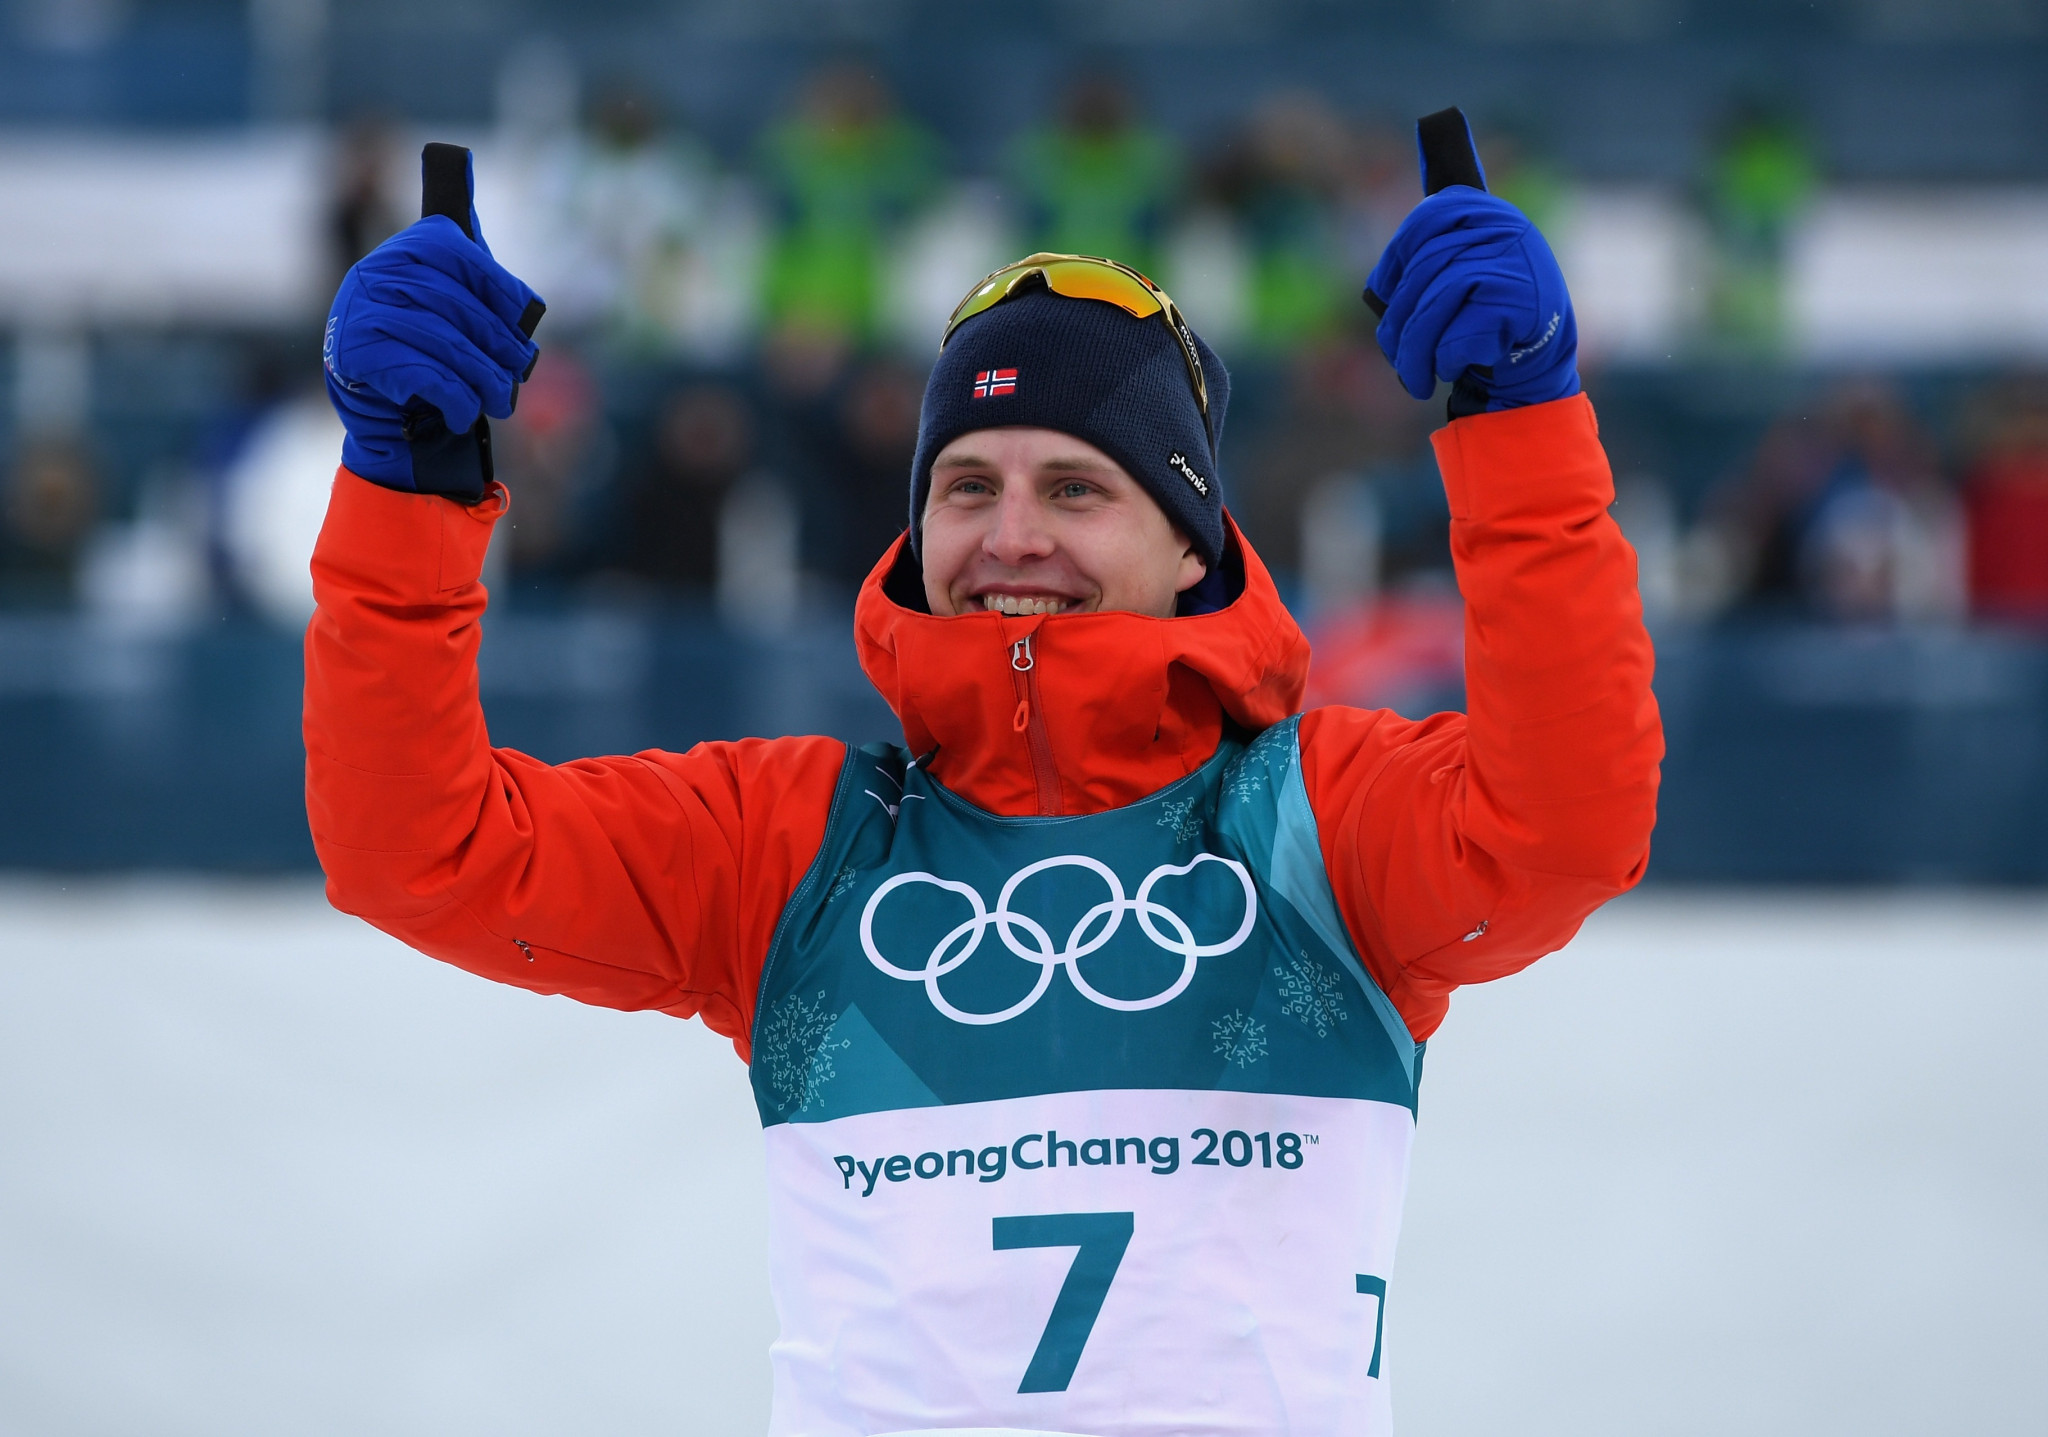 Norway's Simen Hegstad Krüger recovered from an early fall to lead a Norwegian podium sweep in the men’s 15 kilometres + 15km skiathlon event here at the Pyeongchang 2018 Winter Olympic Games ©Getty Images